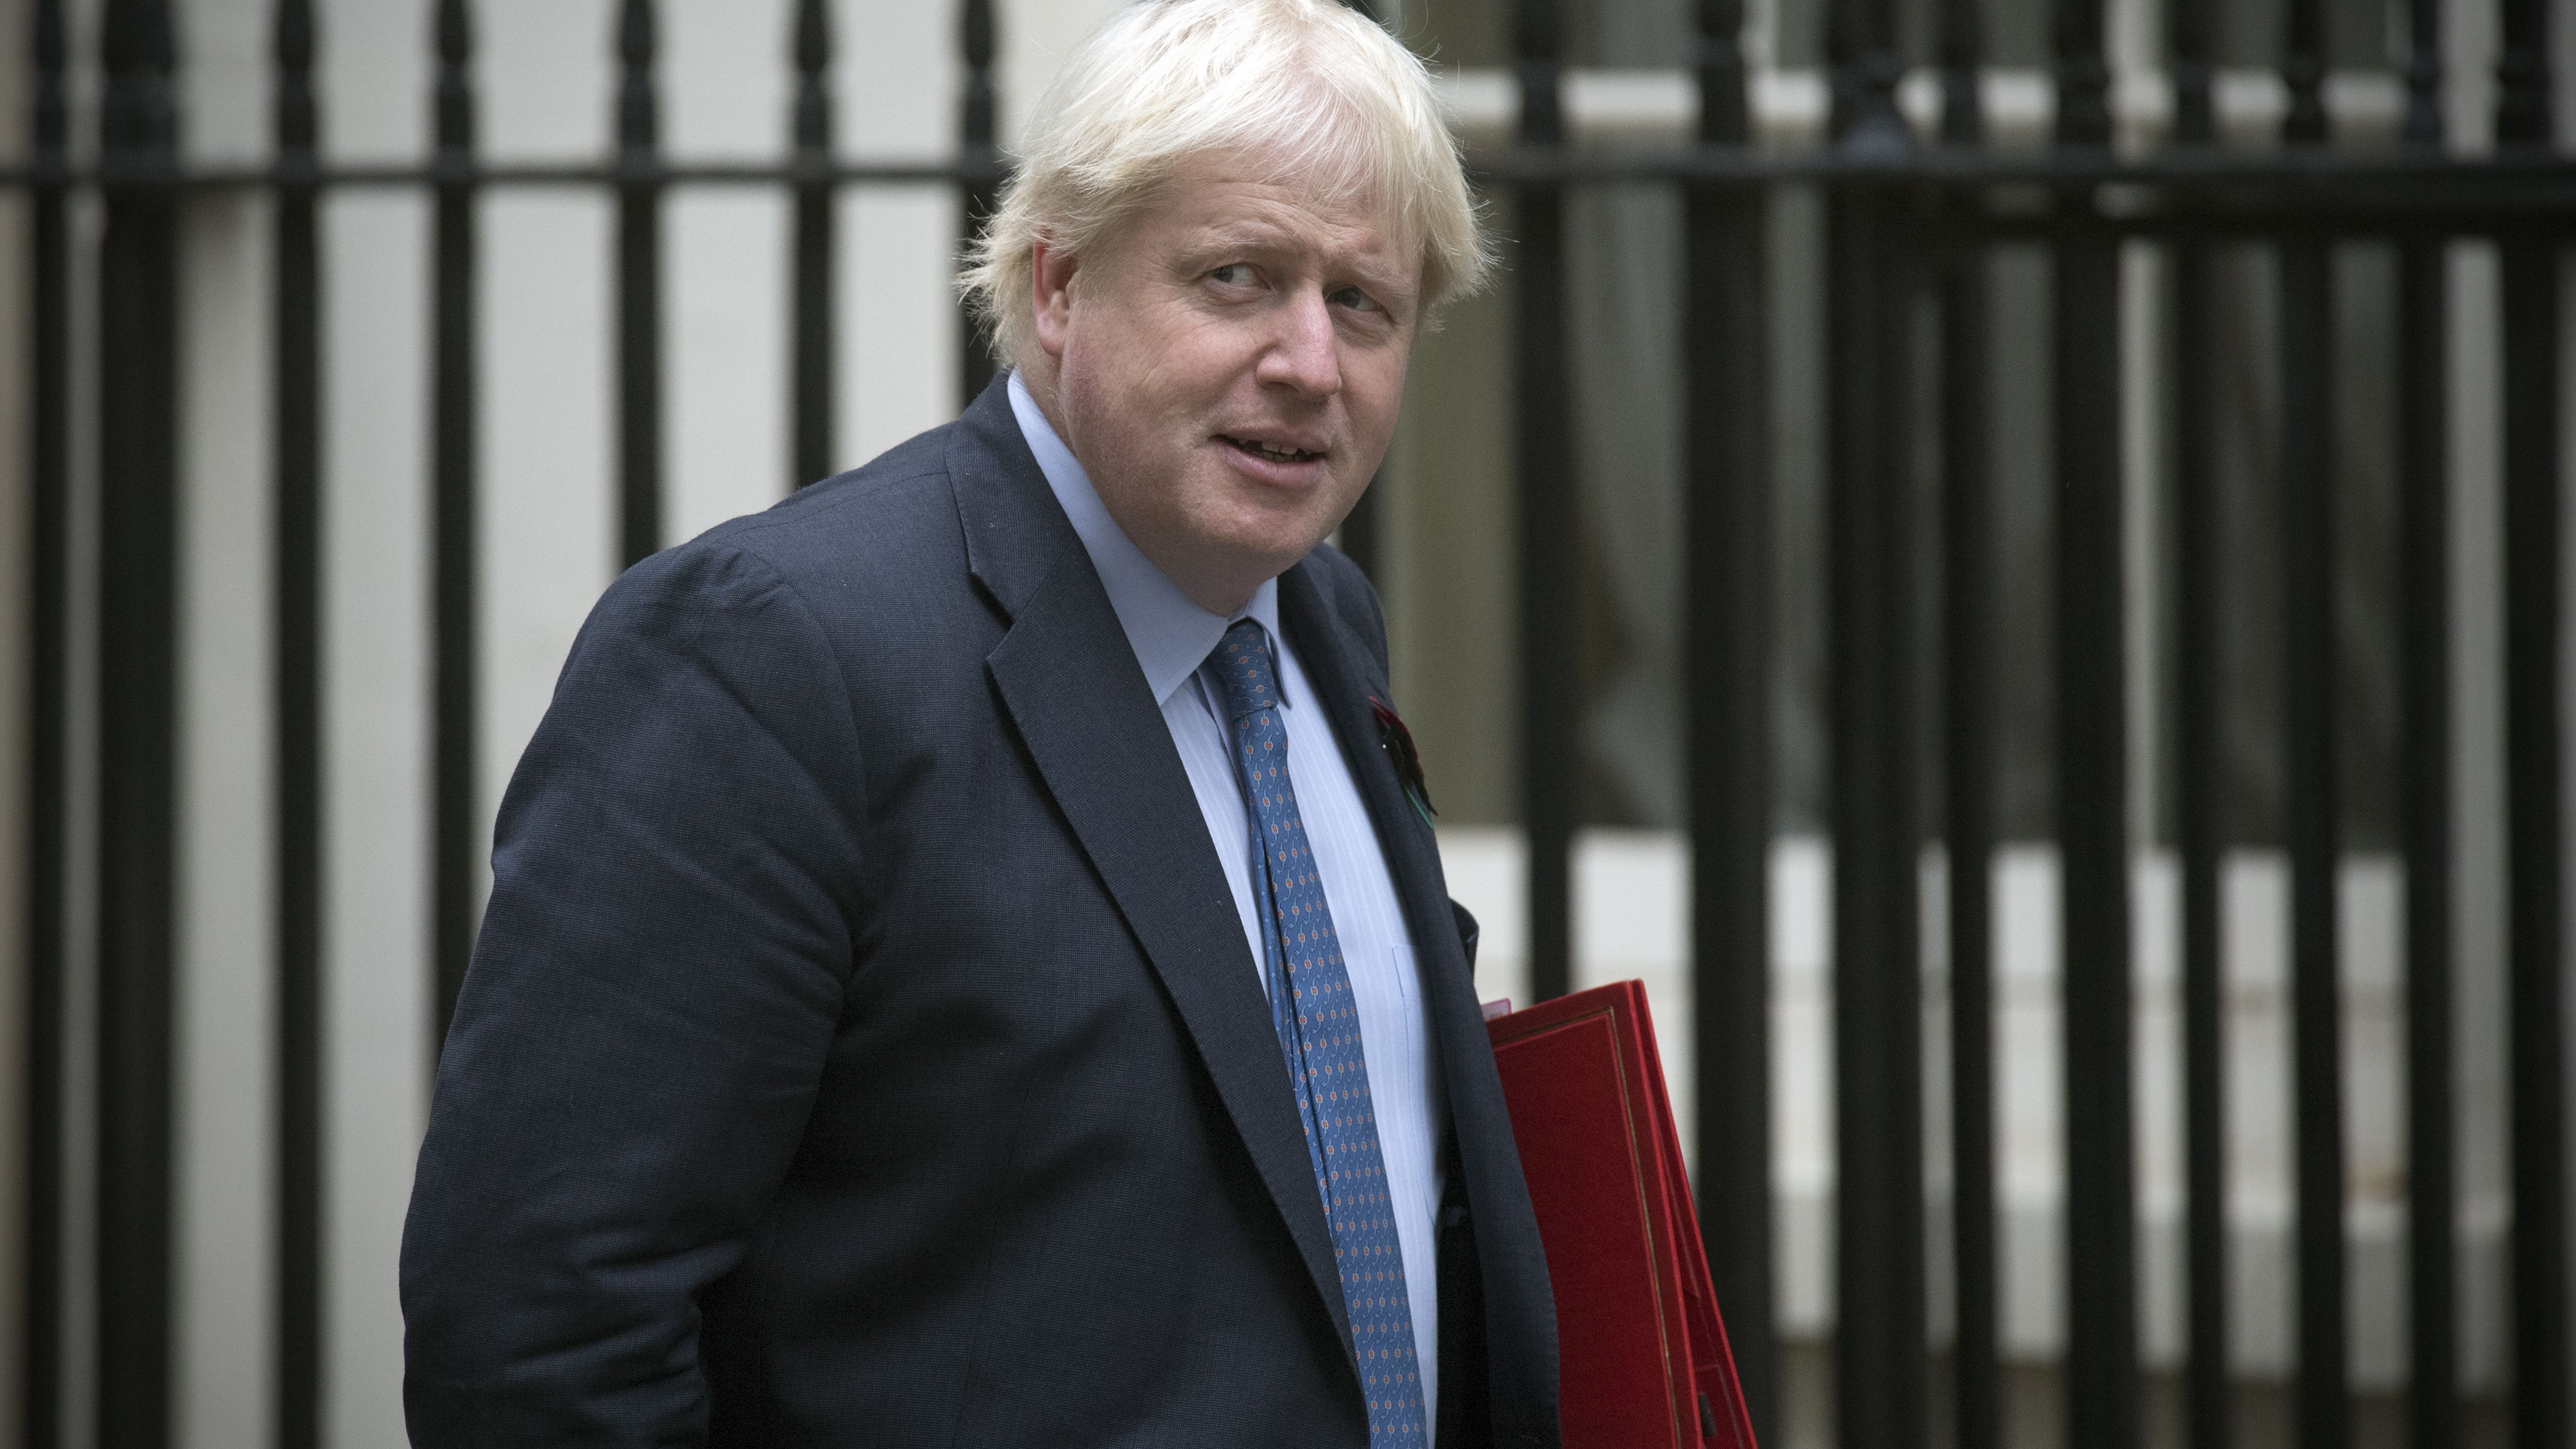 UK Foreign Secretary Boris Johnson, pictured on October 31, is under fire for comments made about a British-Iranian woman in custody in Iran.